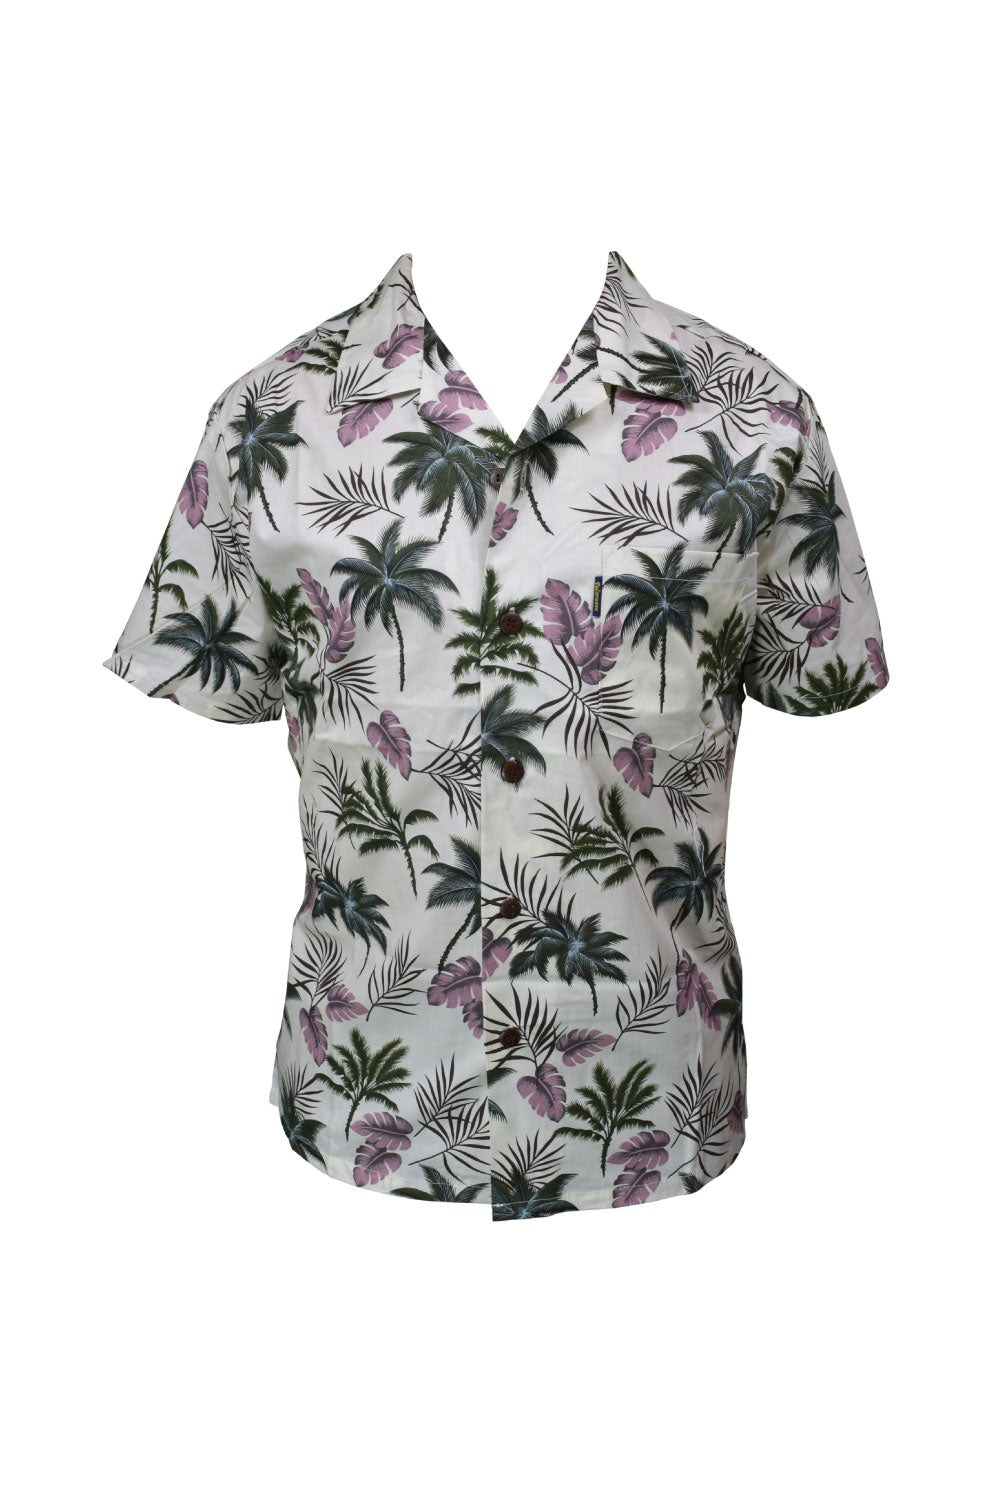 Image of the front of the Purple Palm Hawaiian Men's Shirt.